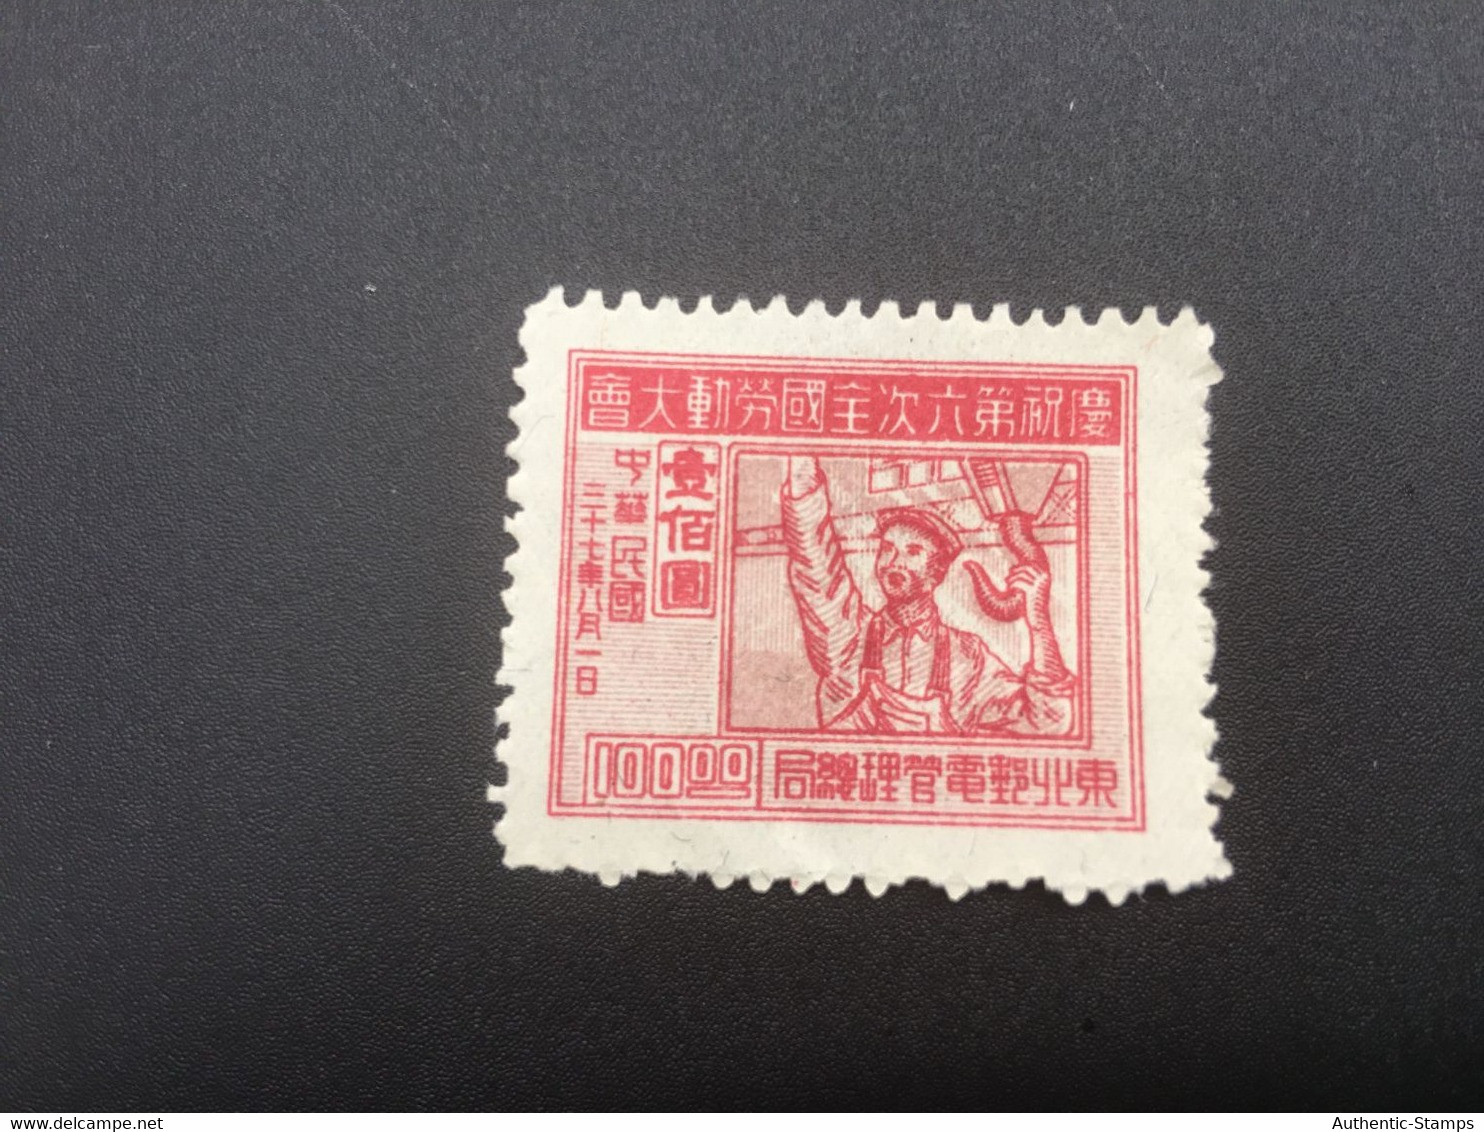 CHINA STAMP, UnUSED, TIMBRO, STEMPEL, CINA, CHINE, LIST 6178 - North-Eastern 1946-48